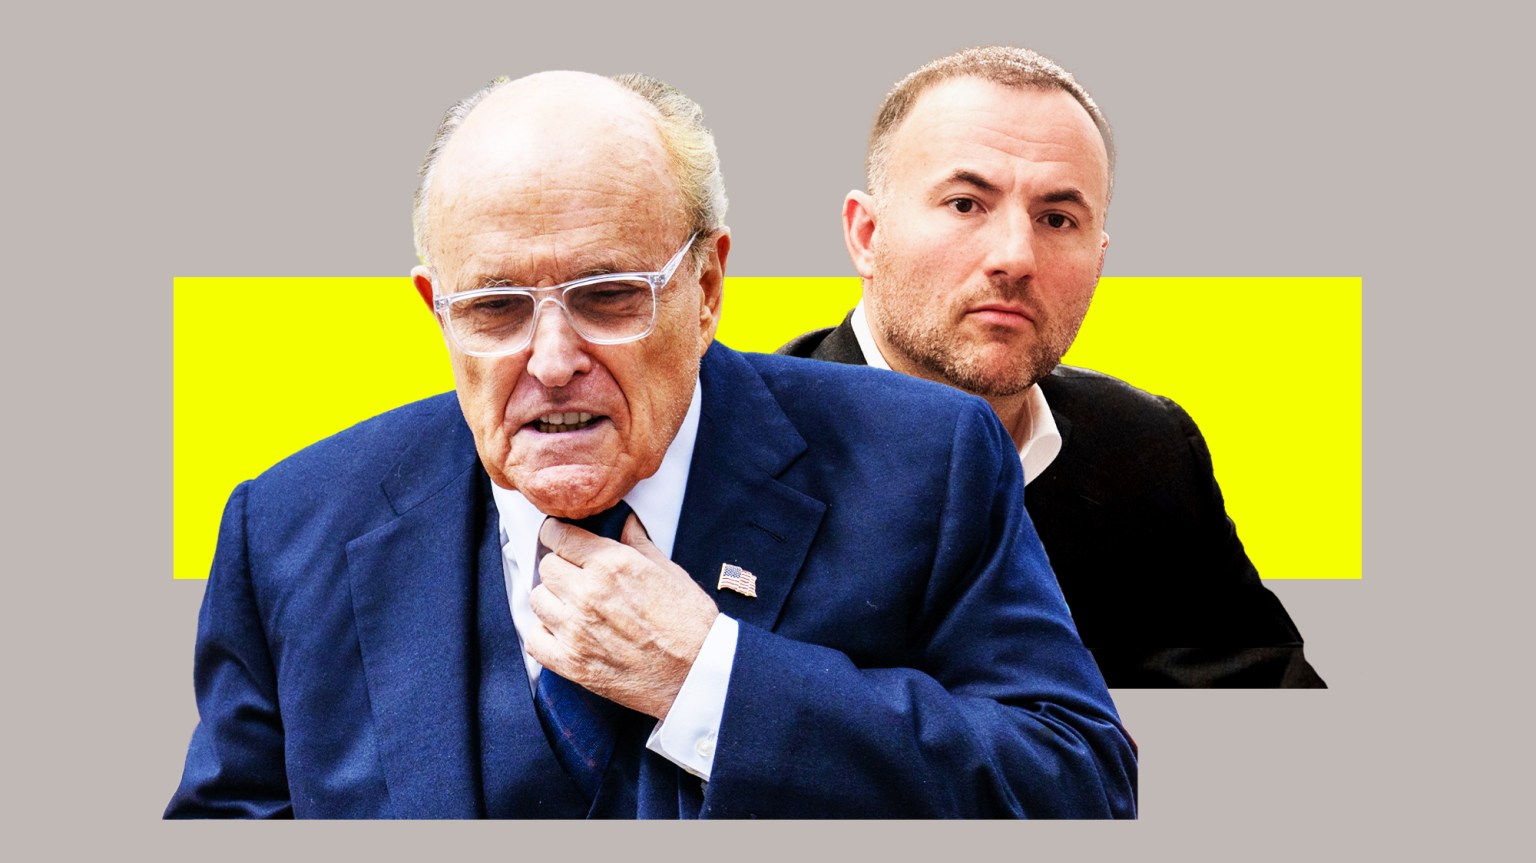 A New Rudy Scandal: FBI Agent Says Giuliani Was Co-opted by Russian Intelligence (motherjones.com)